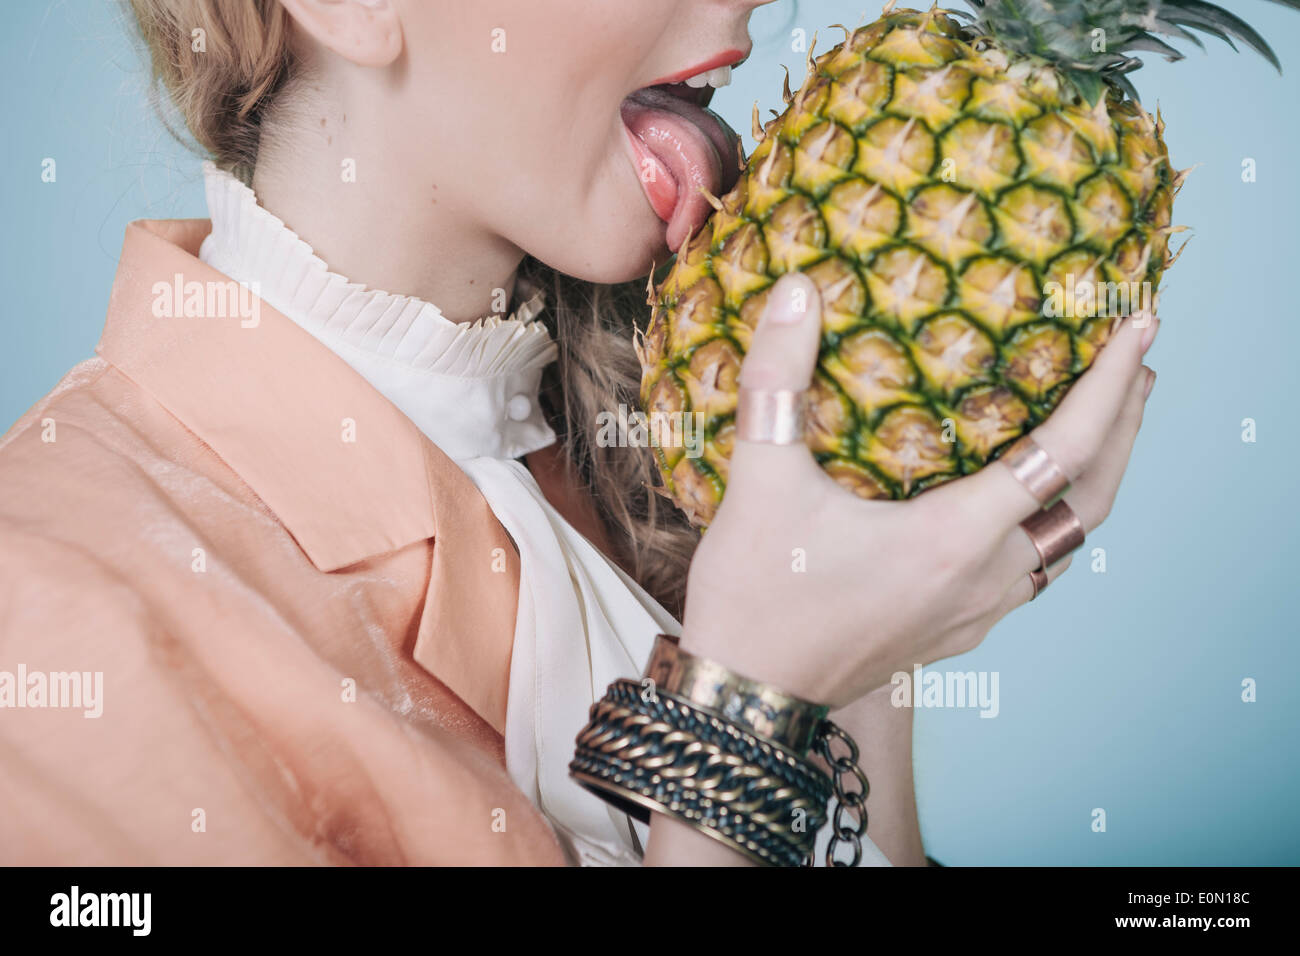 Concept of young woman loving pineapple so much she licks it like one would ice cream. Stock Photo